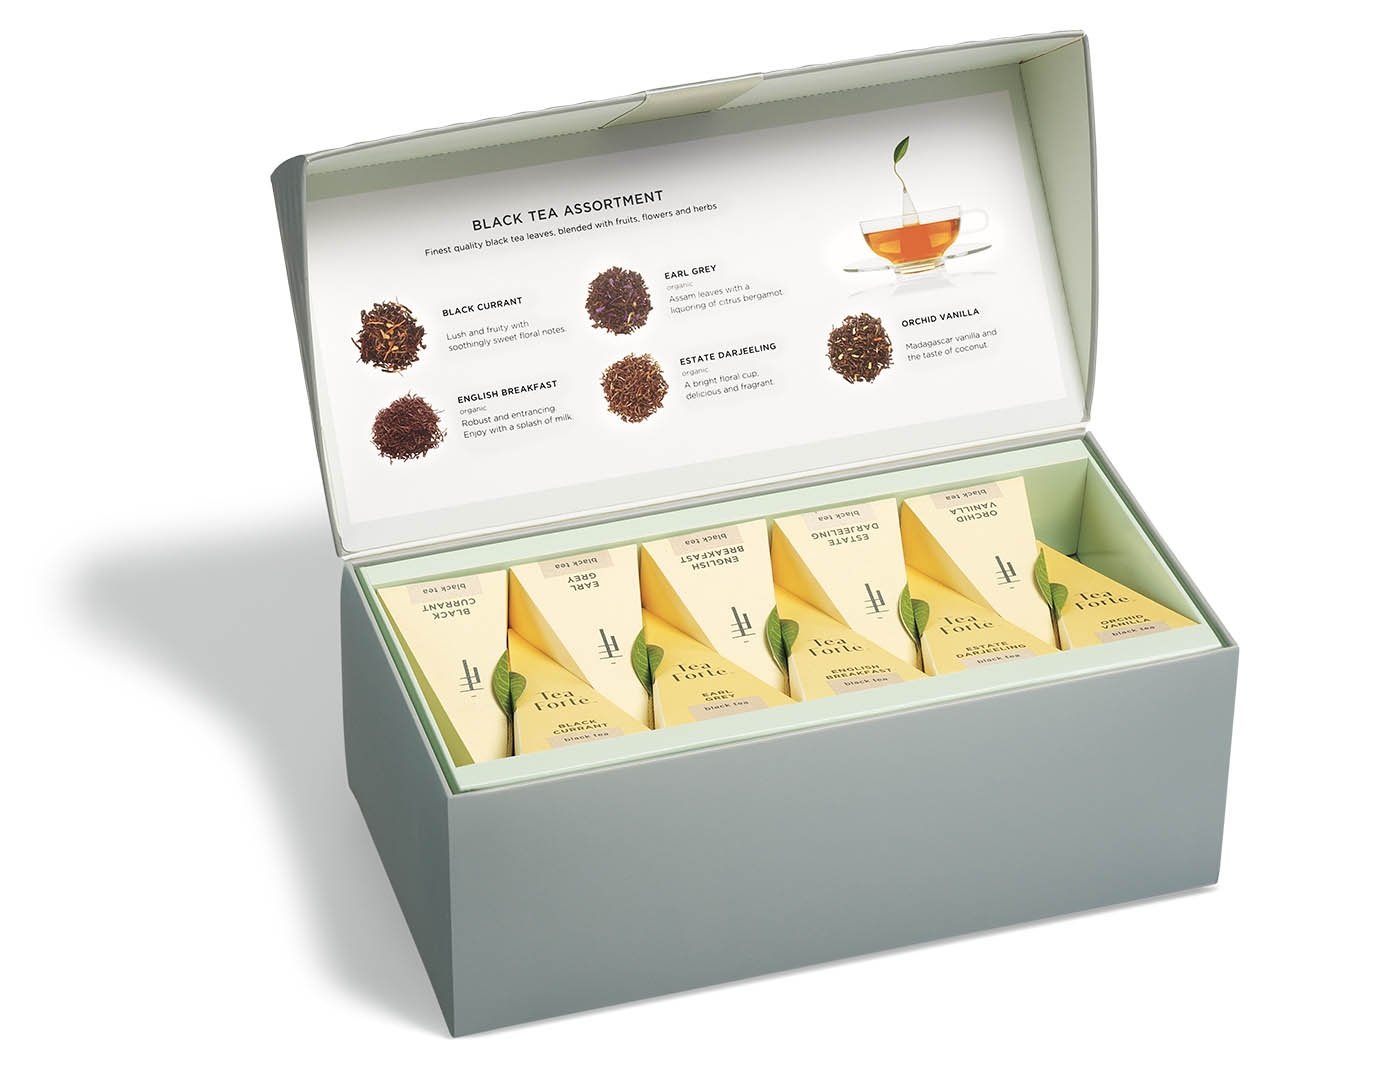 Black tea assortment in a 20 count presentation box with lid open